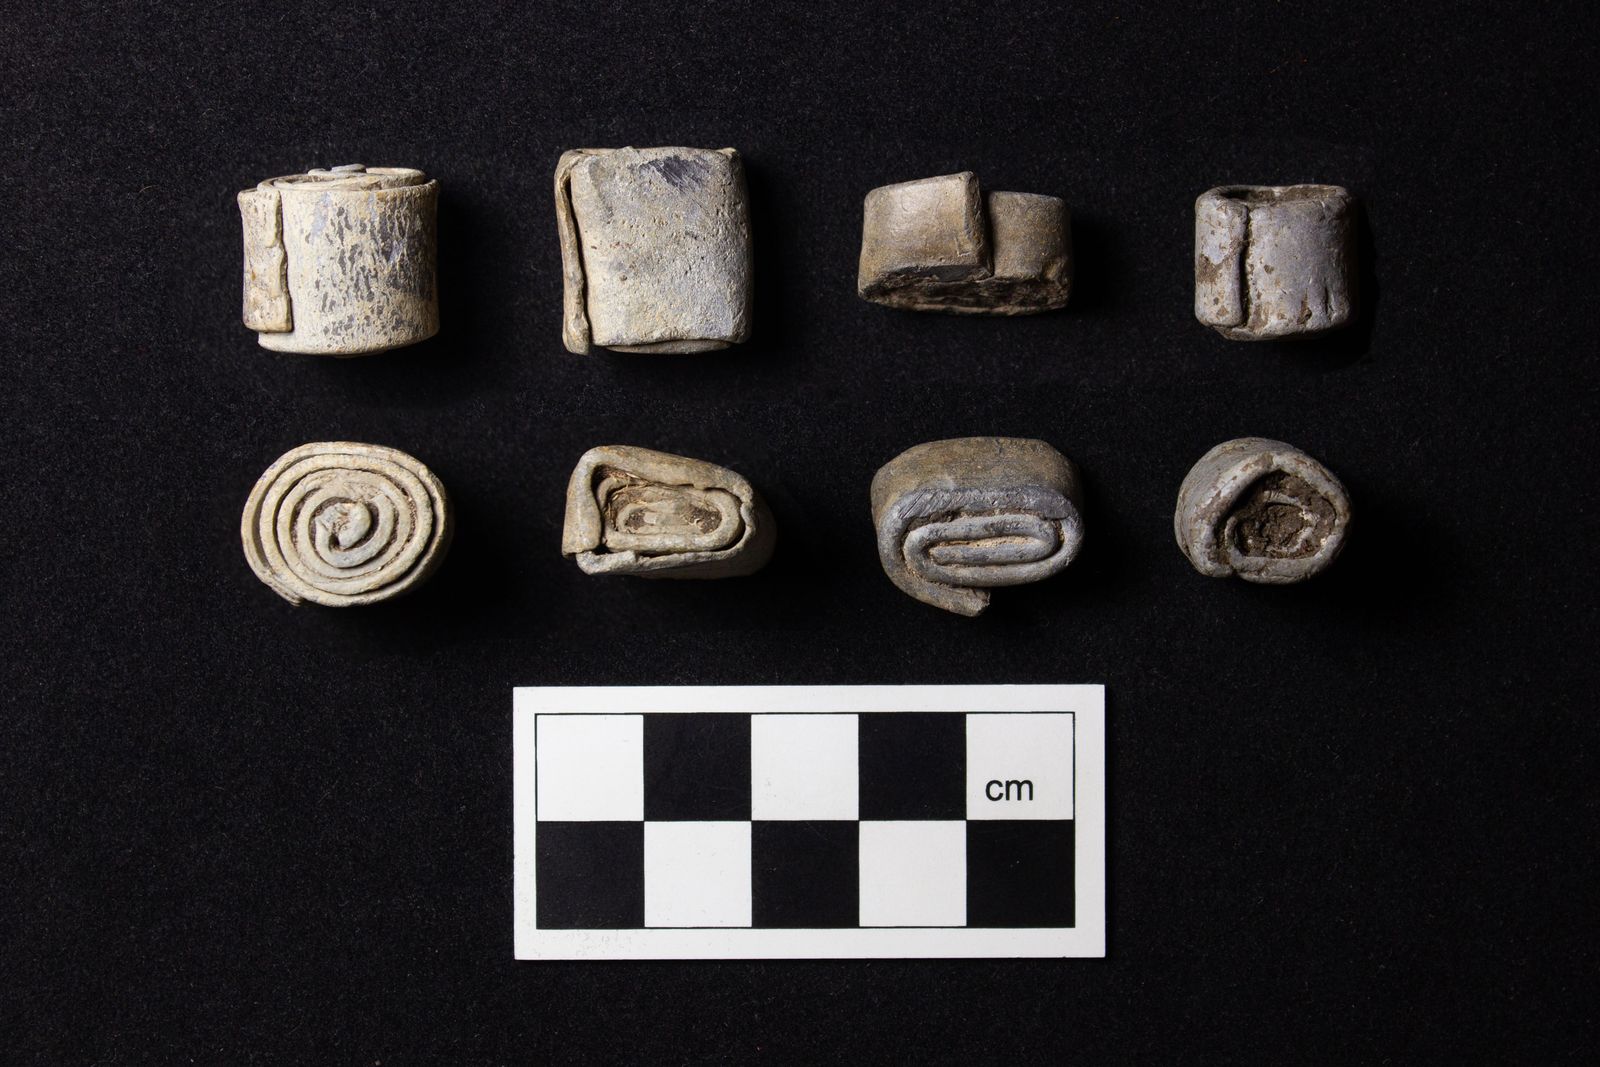 Archaeologists Find 'Remarkable' Roman Villa Full of Coins, Jewelry and 'Curse Tablets'